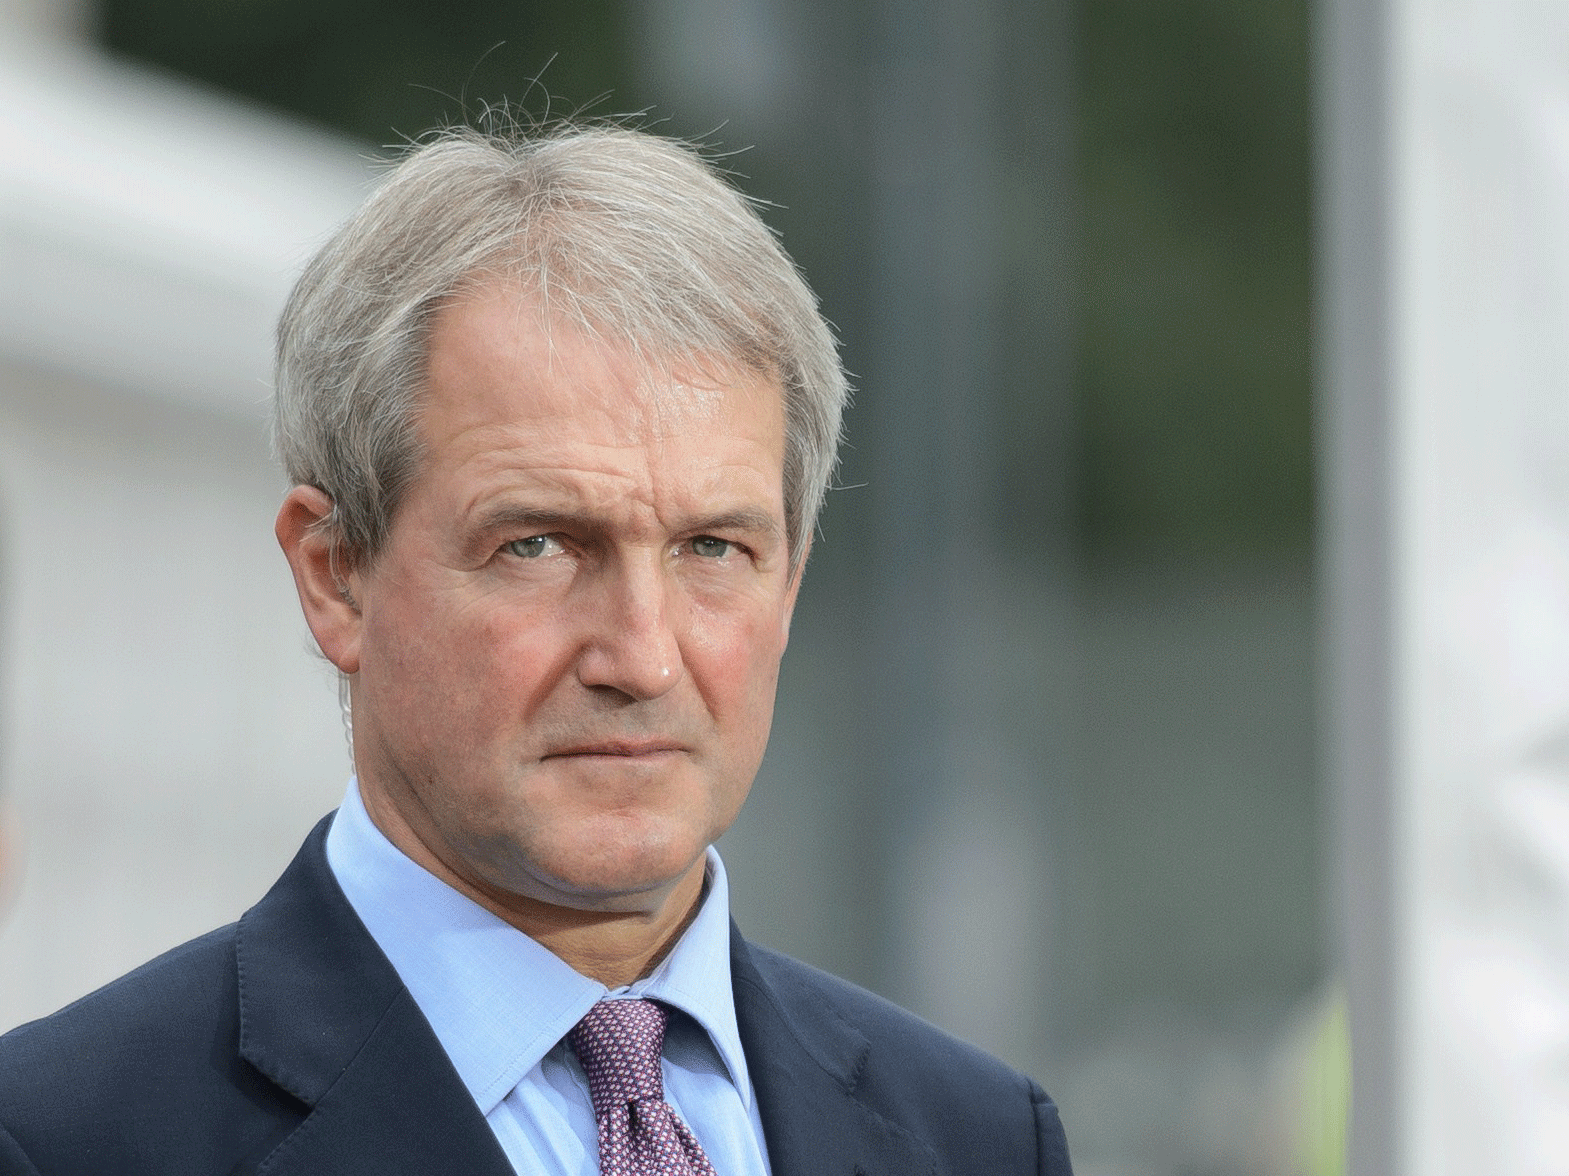 North Shropshire MP Owen Paterson called the SNP "Marxists", who treat England like a "piggy bank that can be raided"